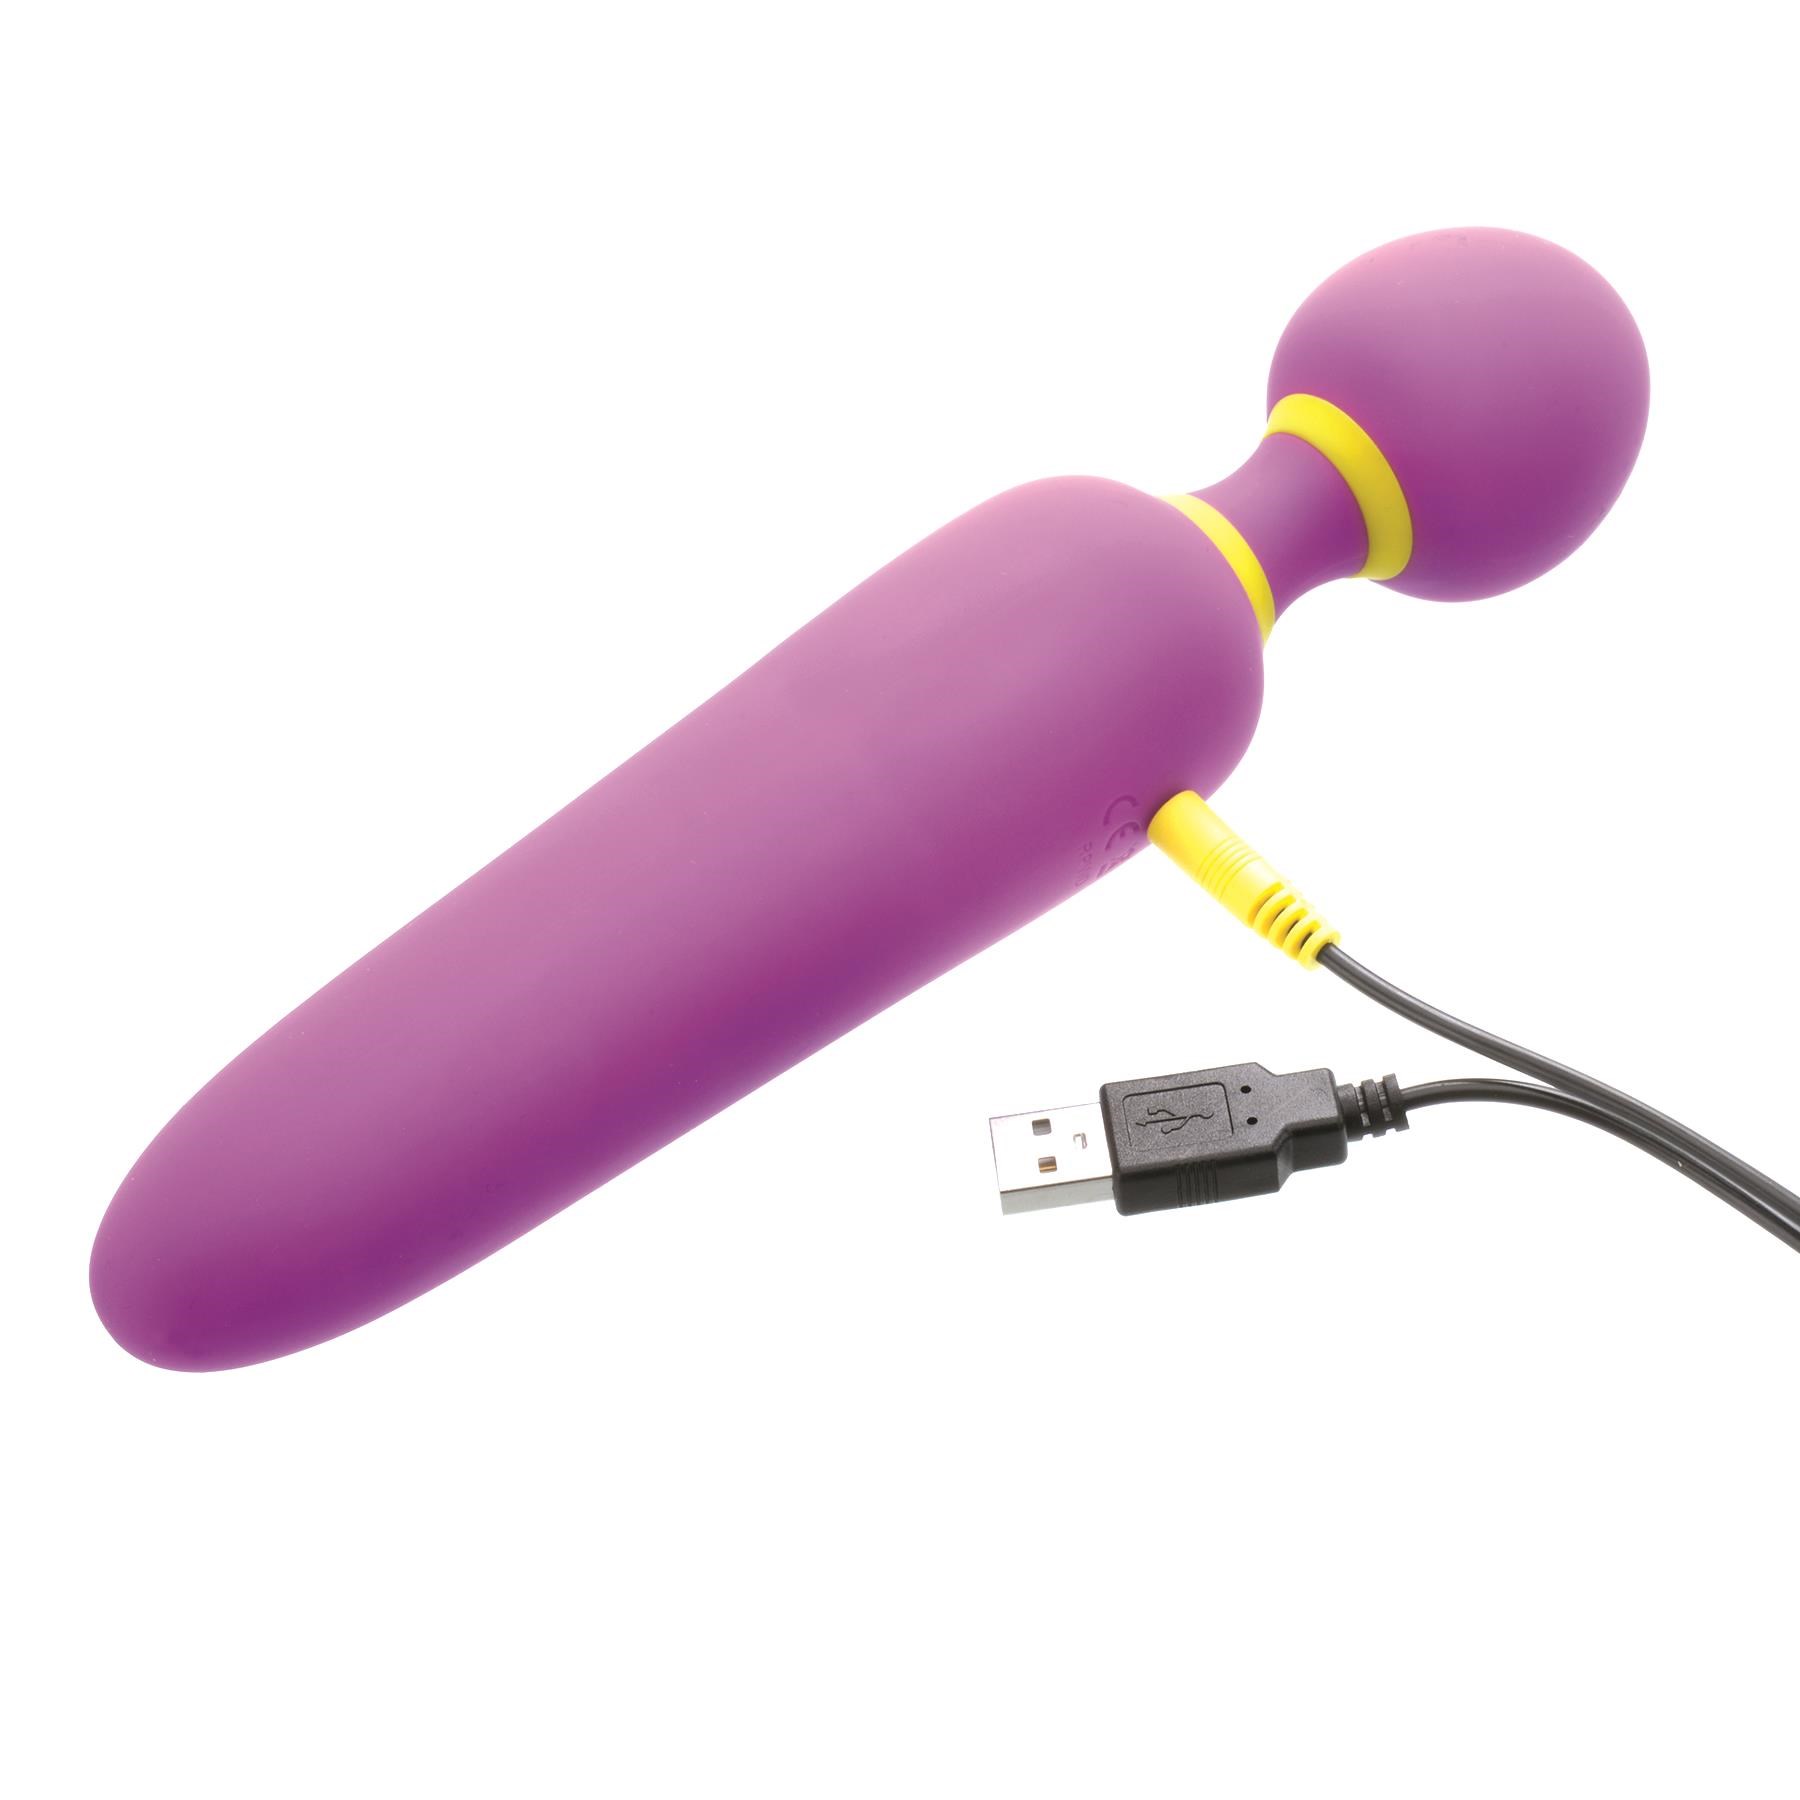 Romp Couples Pleasure Kit - Romp Flip Wand Massager - Showing Where Charger is Placed